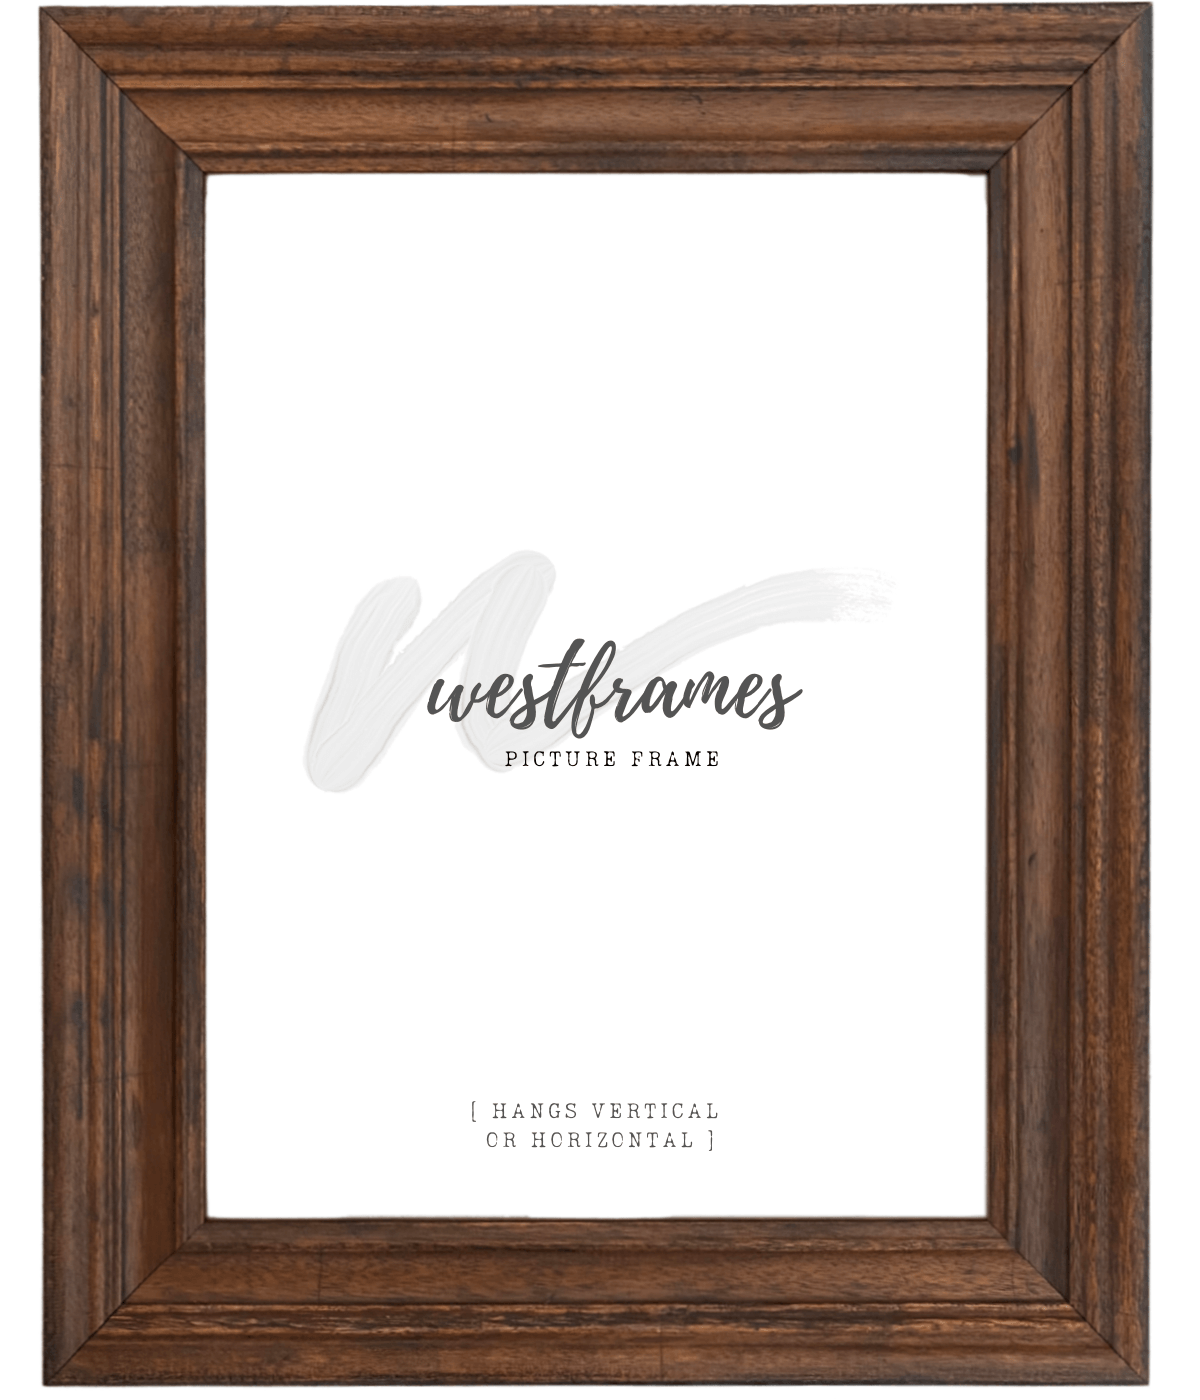 Farmhouse Distressed Rustic Picture Frame Natural Wood Pecan 2.25" Wide - West Frames